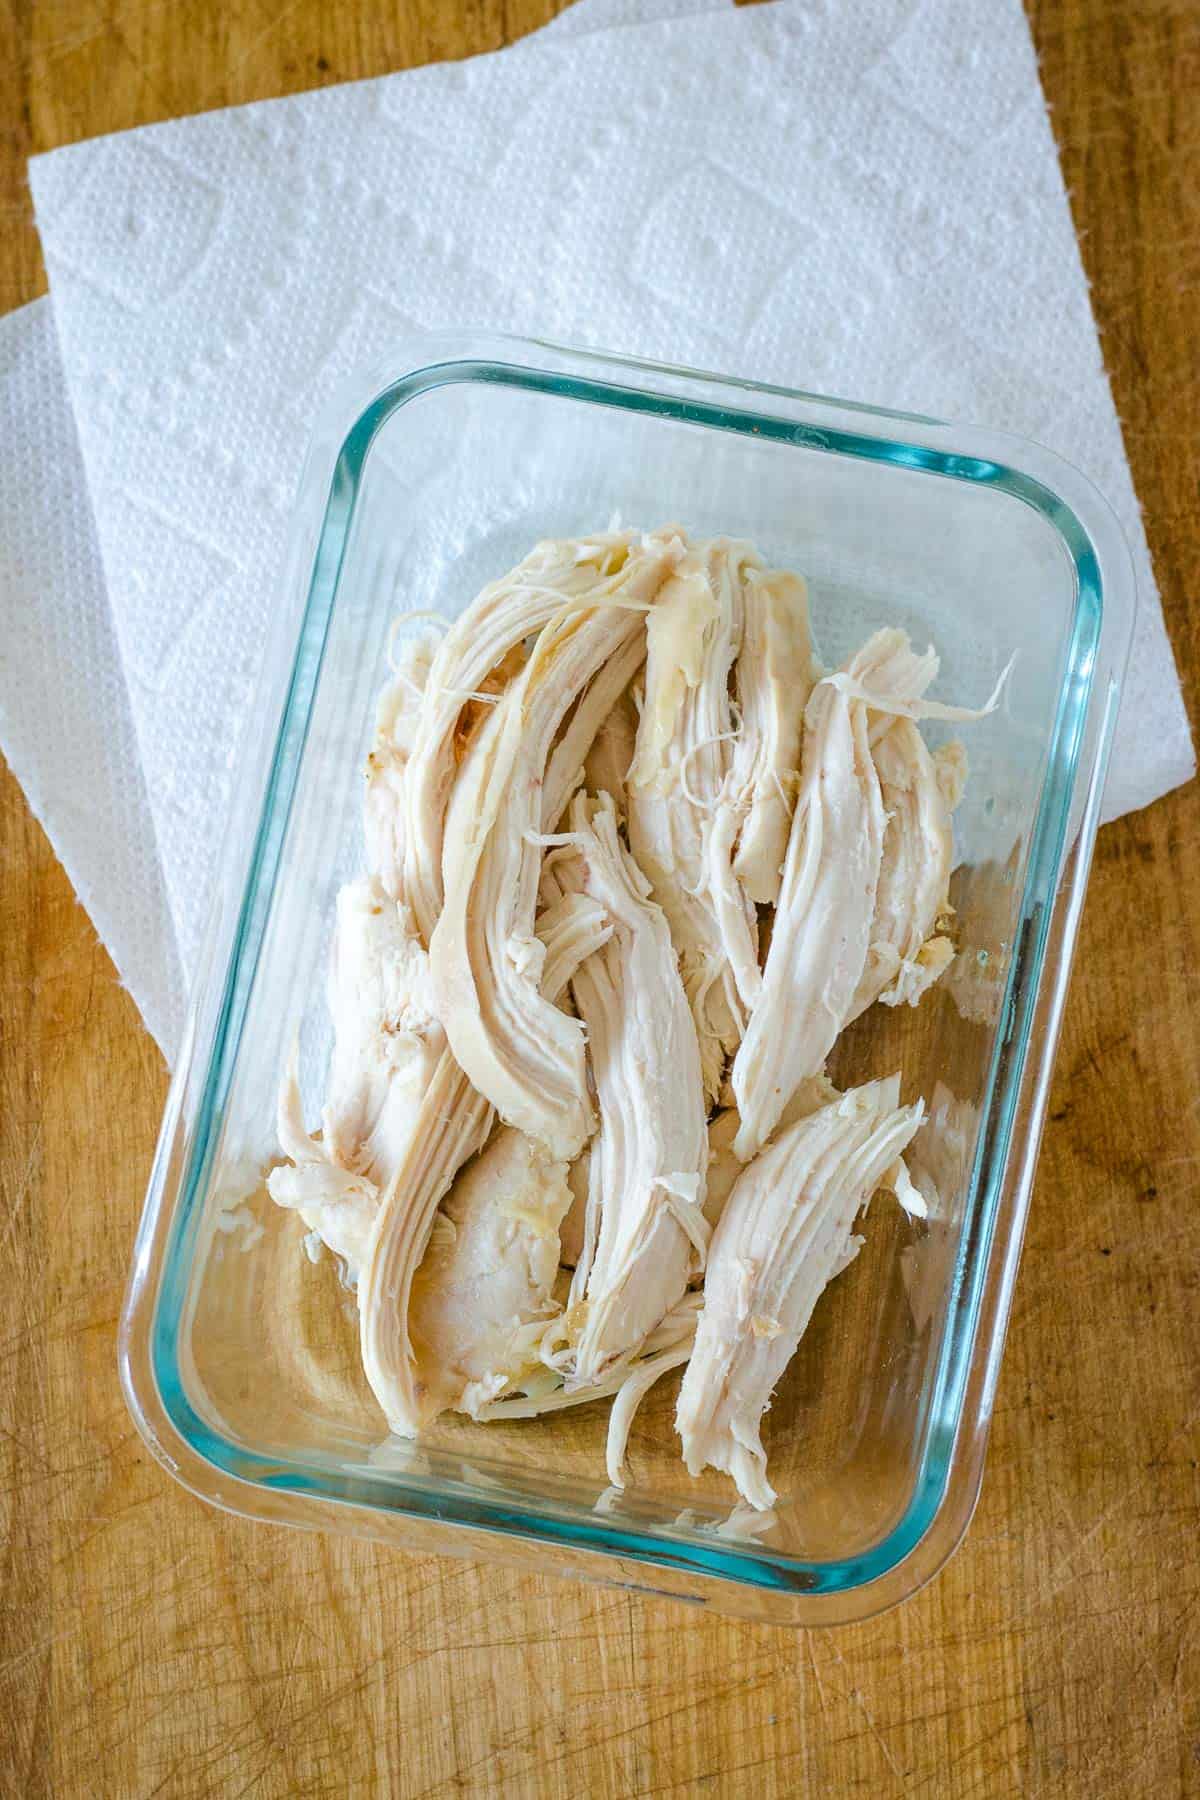 Shredded chicken in glass dish with paper towel